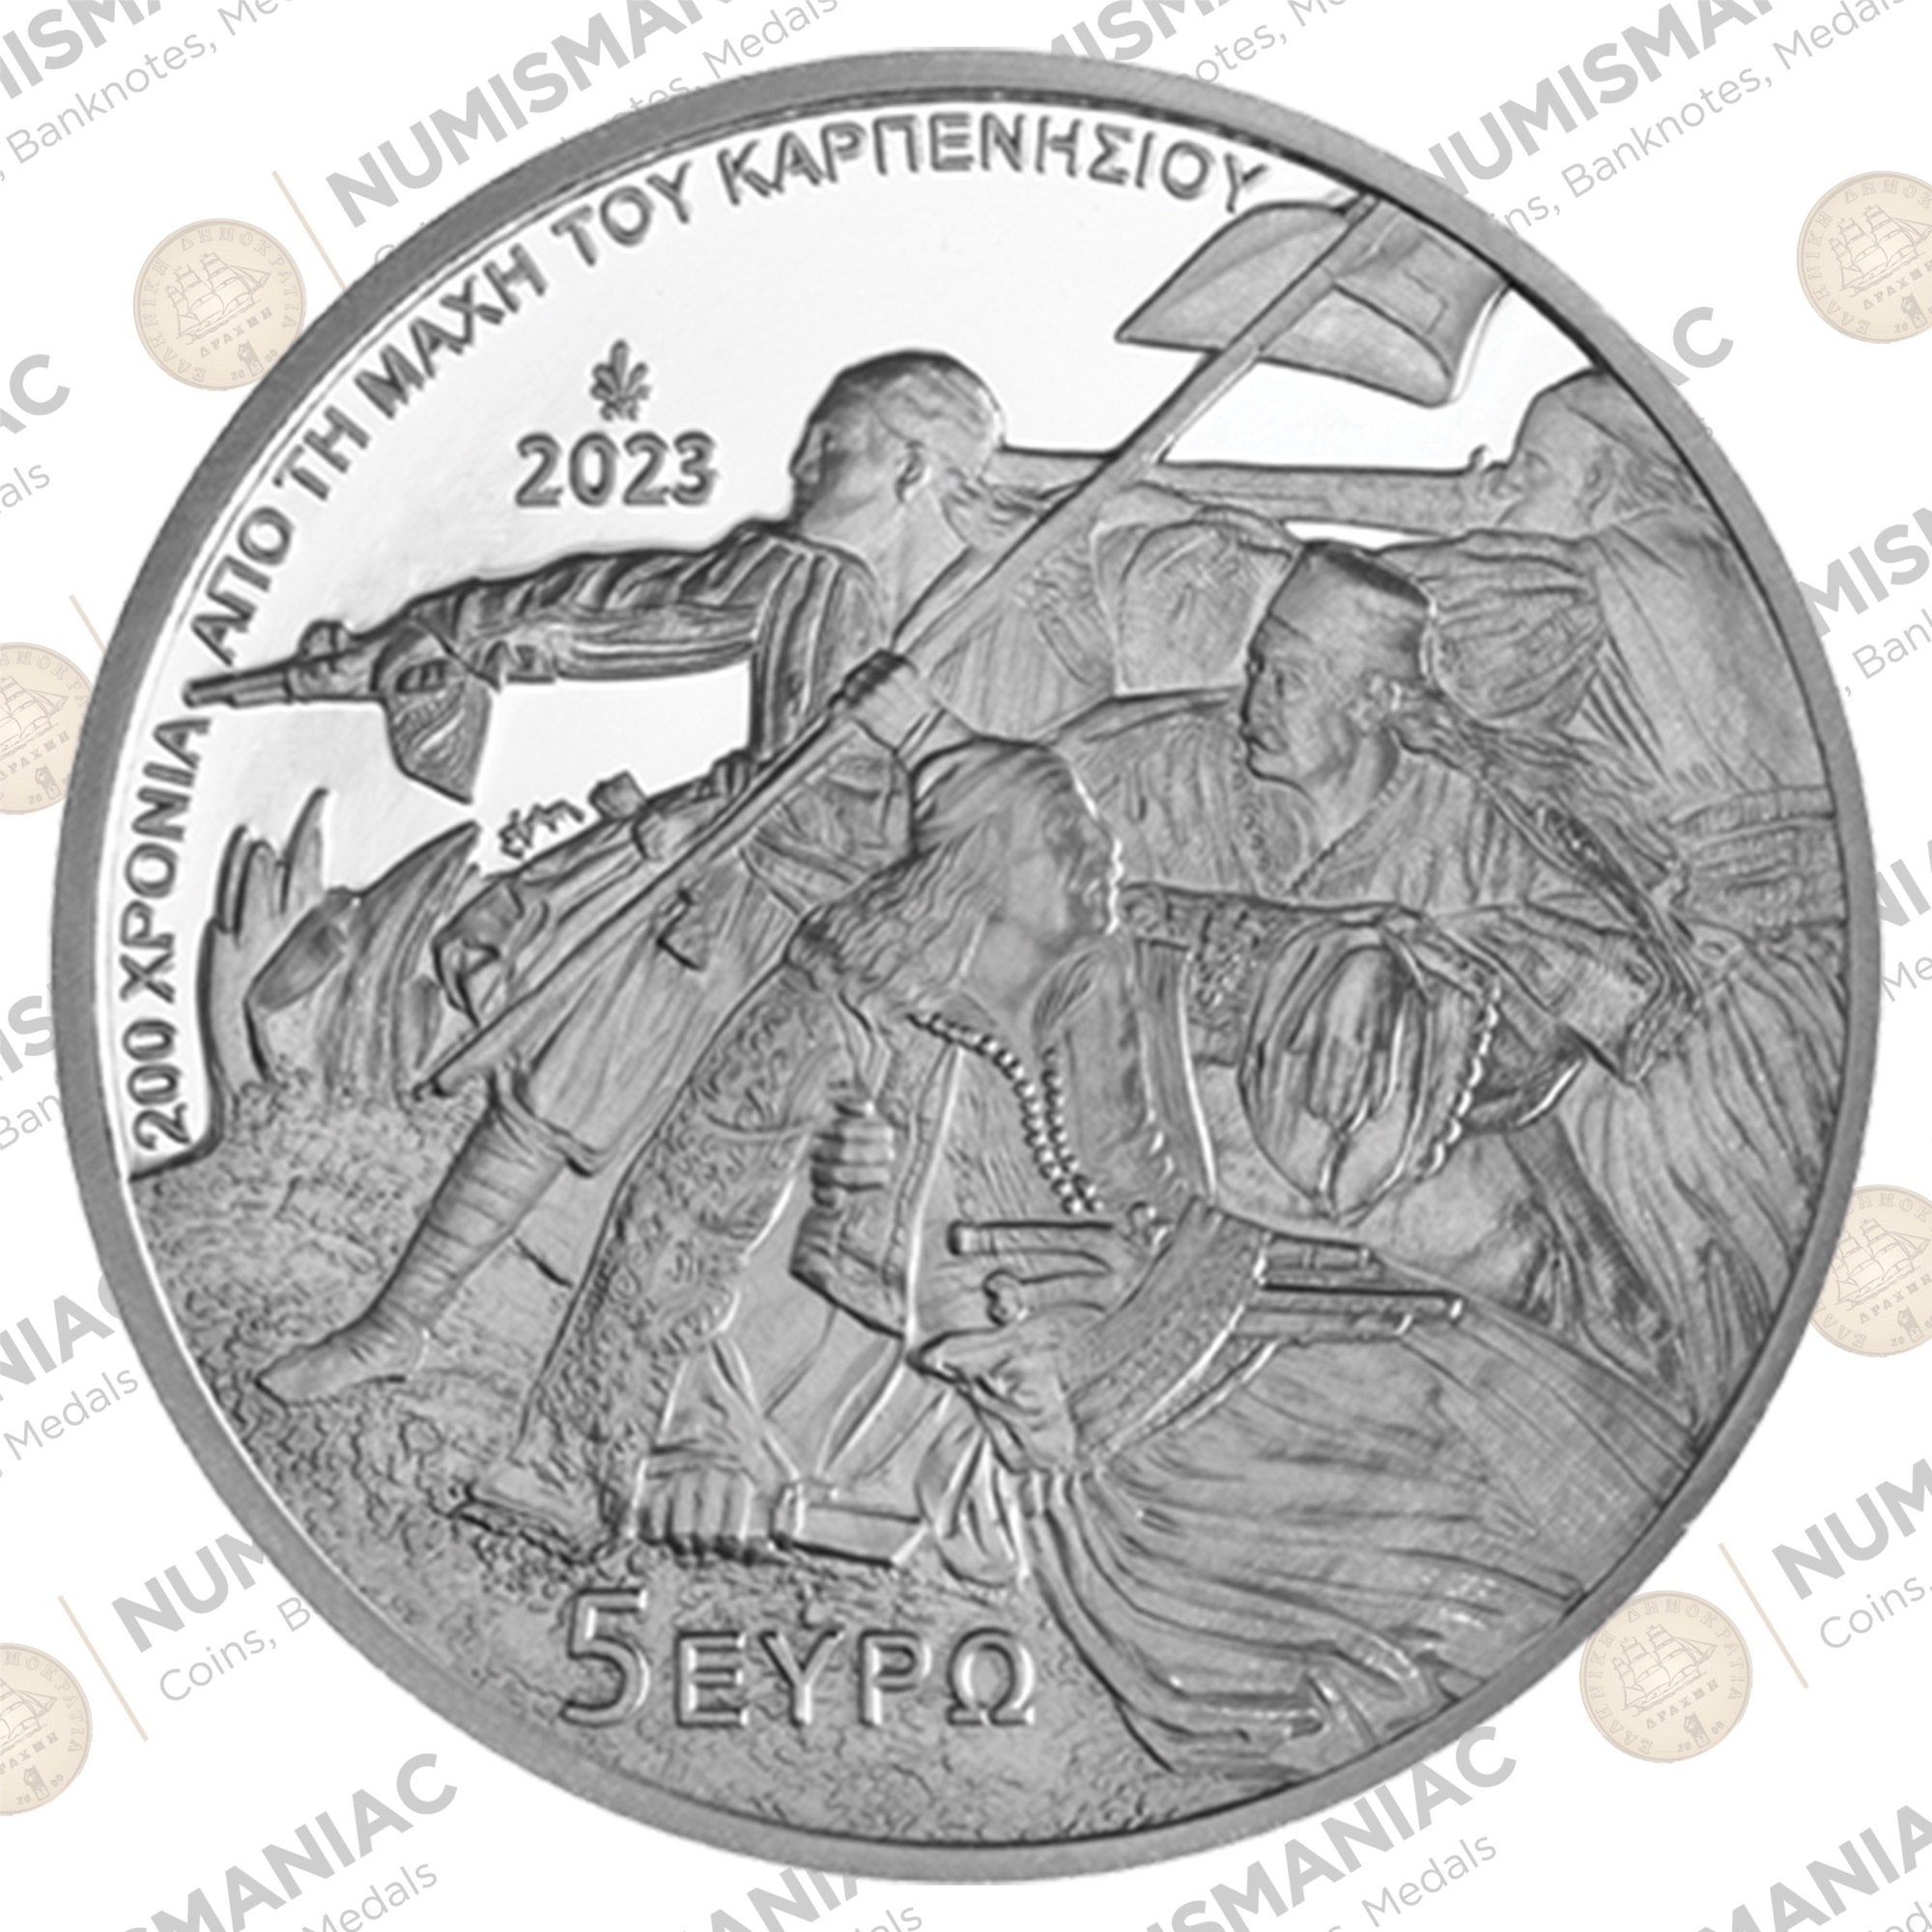 Greece 🇬🇷 2023 Silver Coin € 5 "200 years from the battle of Karpenisi"A